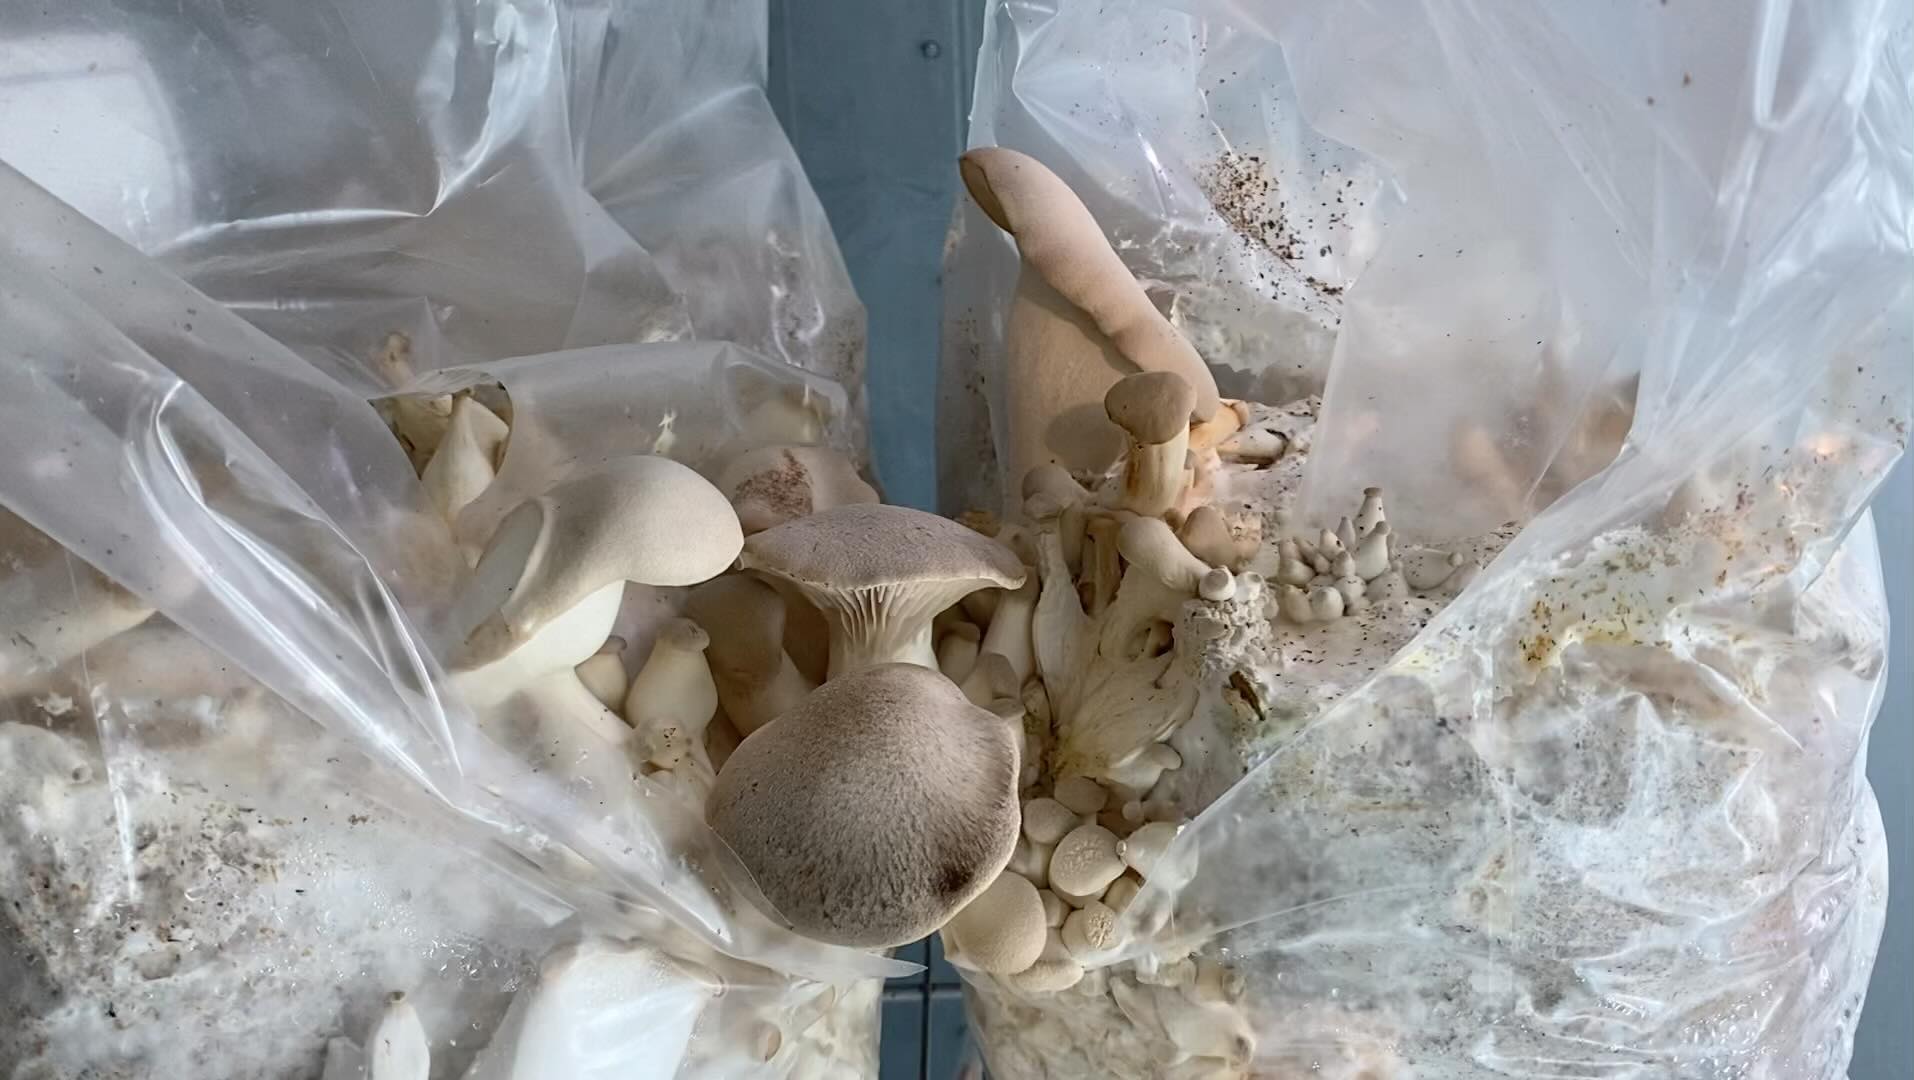 🤪🍄Freaky Fungus Friday🍄🤪
I present to you: conjoined twin king oyster mushroom blocks! They actually grew together! 🤪